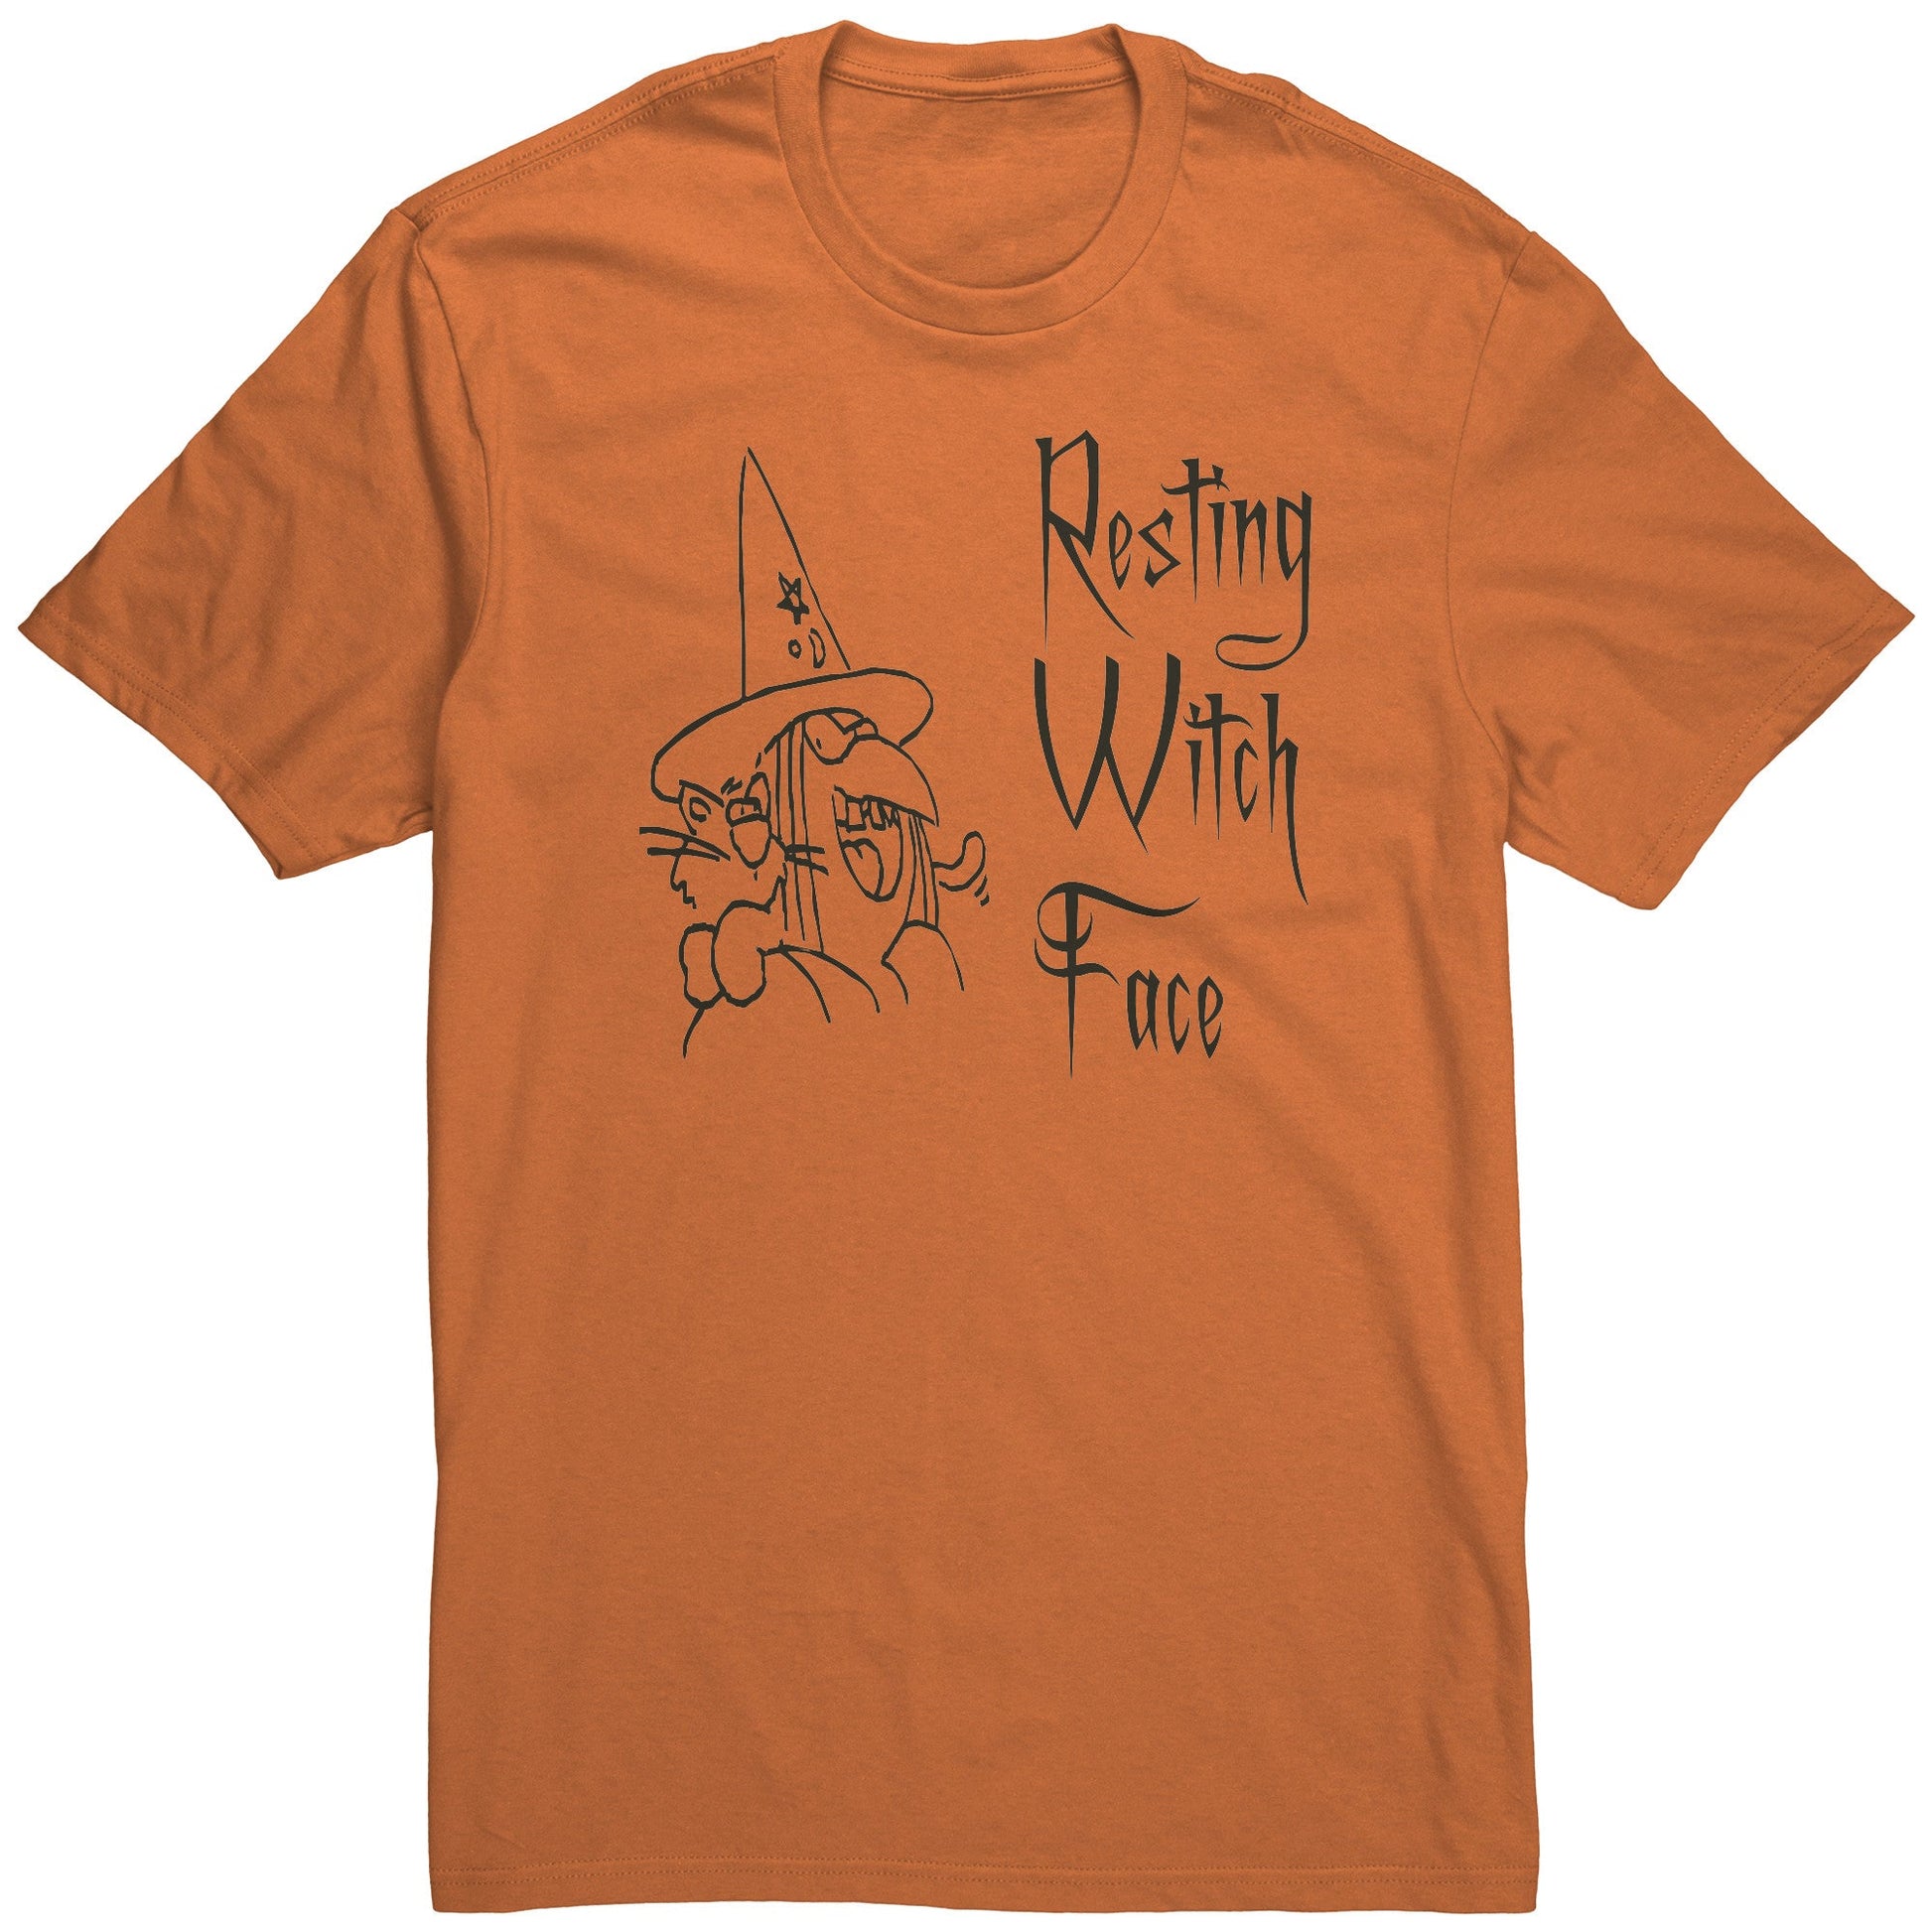 Resting Witch Face in Evil Font with an Image of a Woman and Her Cat - HALLOWEEN Special Muliti Colored Unisex Tee Shirt - Lizard Vigilante